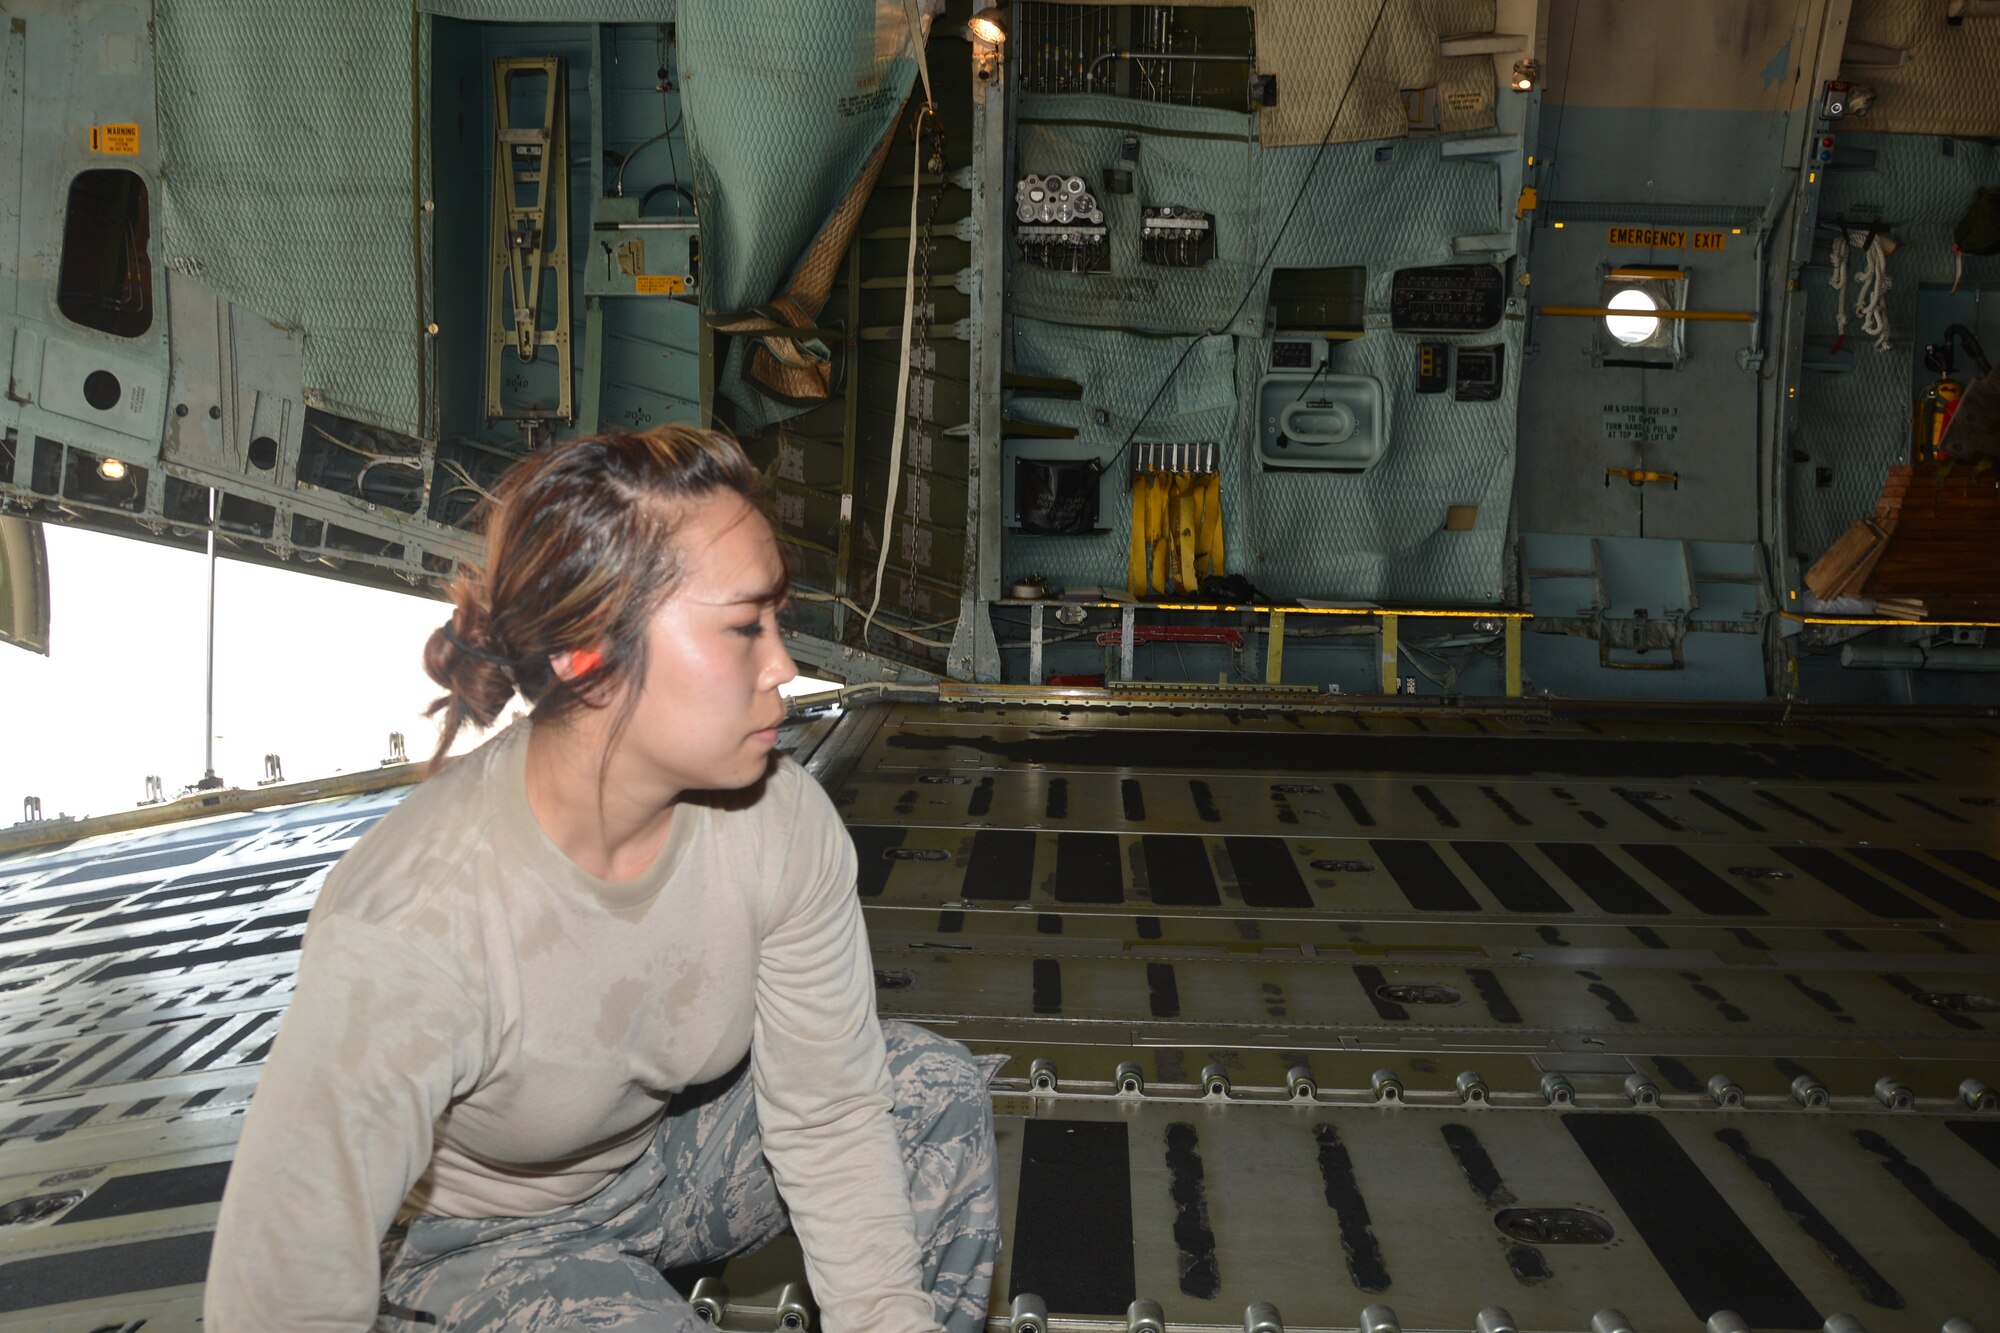 Aerial porter, Tech. Sgt. Sarah Benz, 26th Aerial Port Squadron, Joint Base San Antonio-Lackland, Texas, converts the floor of a C-5A Galaxy aircraft by turning over the rollerized conveyor system, so cargo can be rolled into the cargo bay of the aircraft for Air Force Reserve Command’s Patriot Hook 2014 exercise at Naval Air Station, North Island, Calif., 24 April, 2014. (U.S. Air Force photo/Senior Master Sgt. Minnie Jones)
